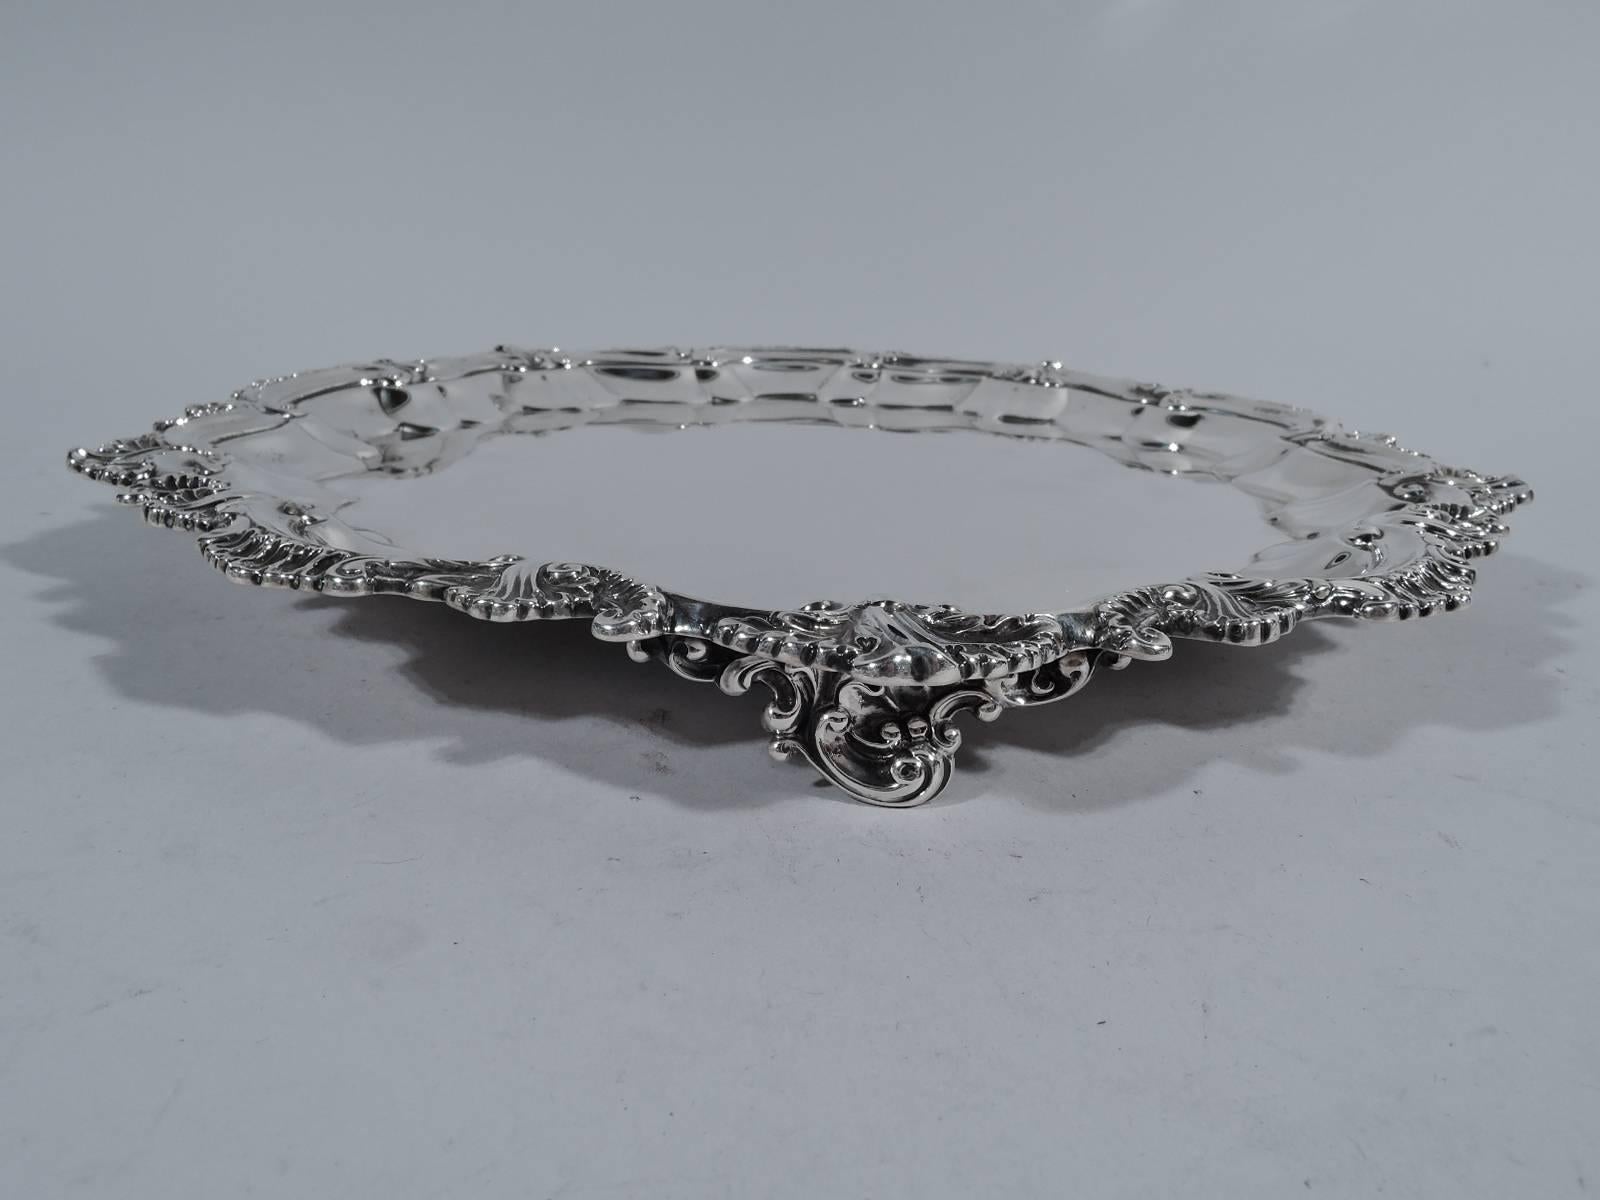 Fancy Georgian Revival sterling silver salver. Made by Shreve, Crump & Low in Boston, circa 1900. Molded rim with shells and leaves. Rests on three scrolled supports. Hallmark includes no. 298. Weight: 17.5 troy ounces.